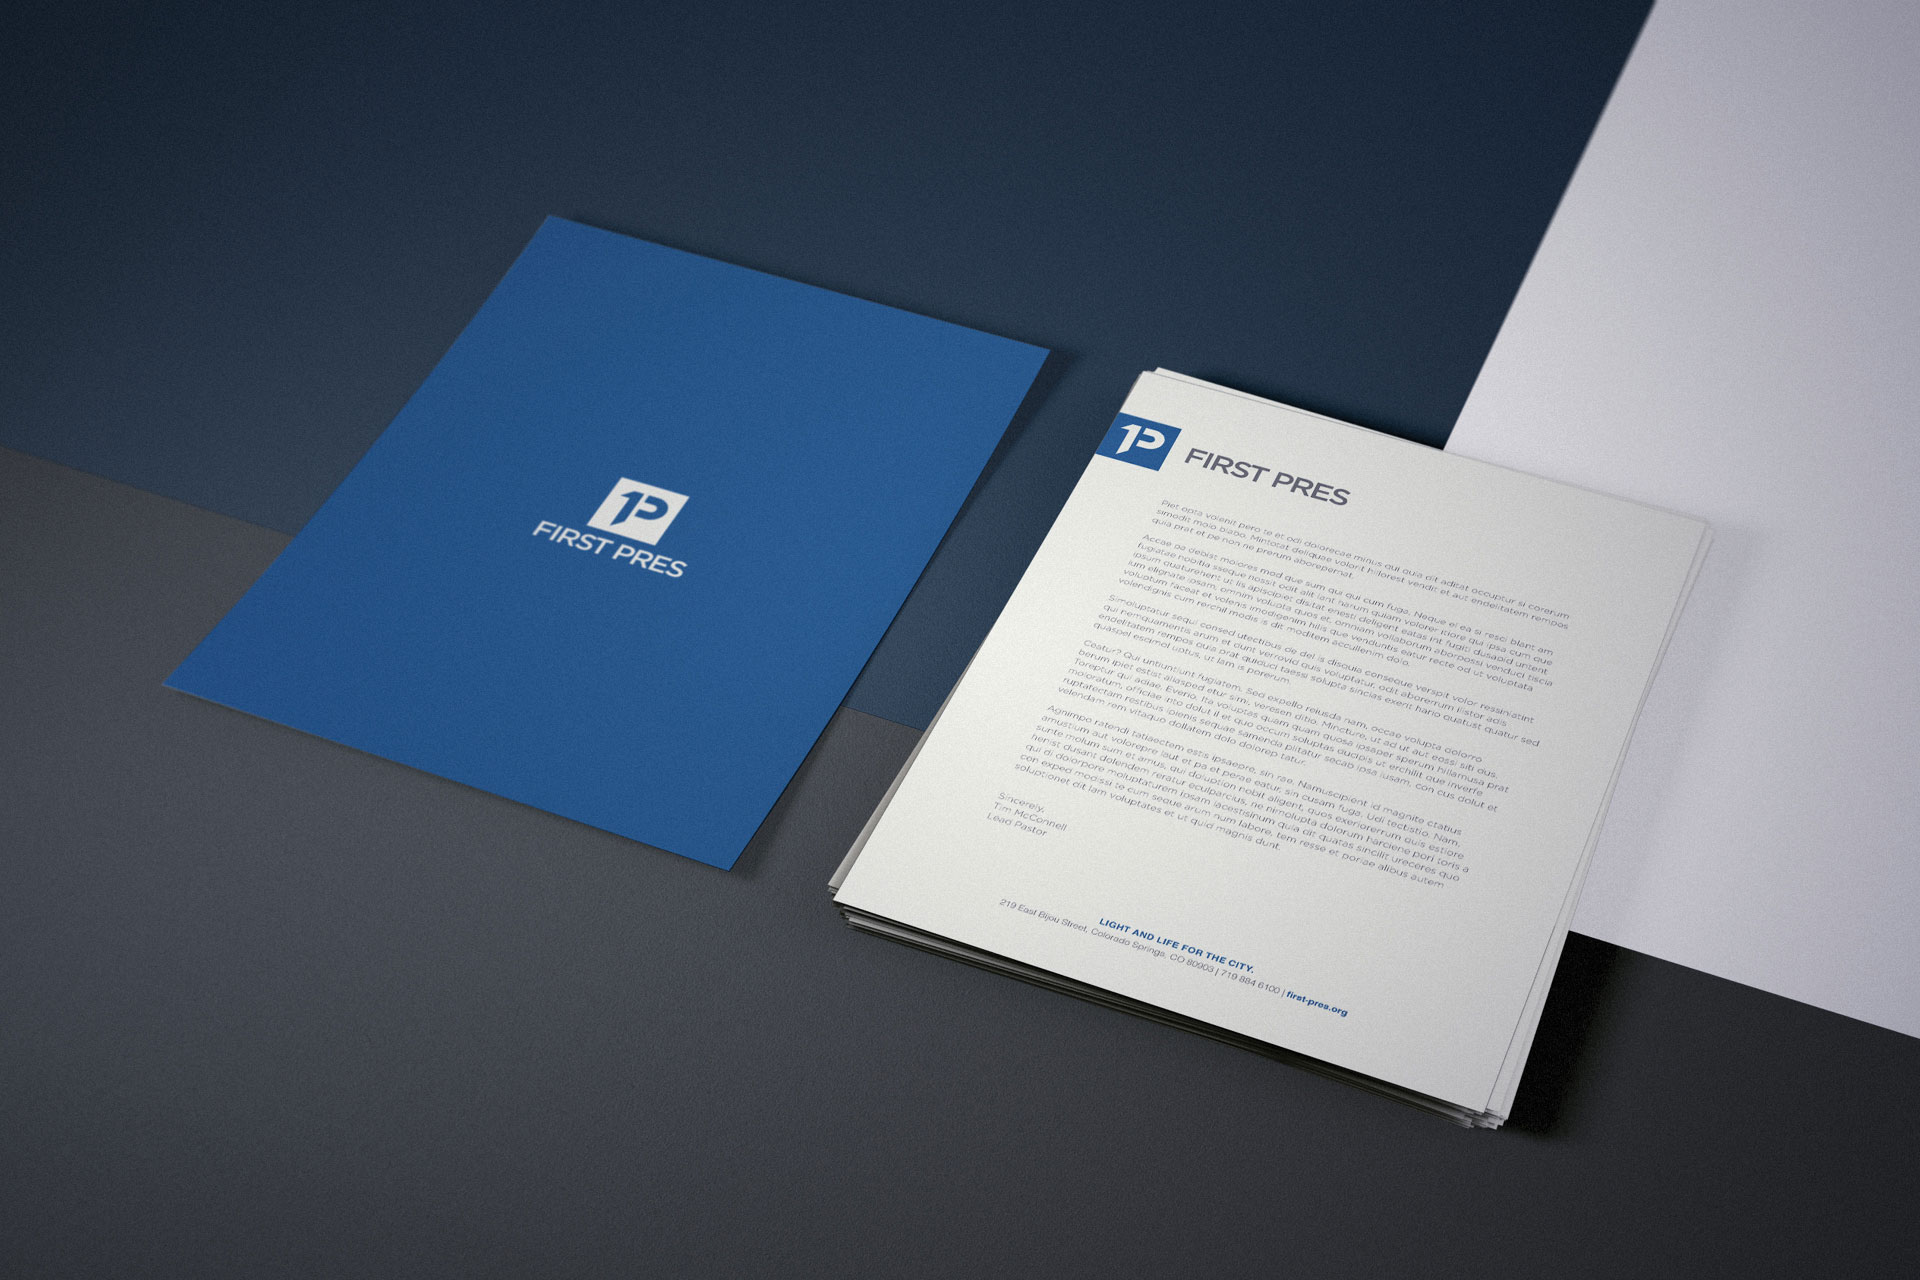 First Pres Branding – Letterhead Front and Back